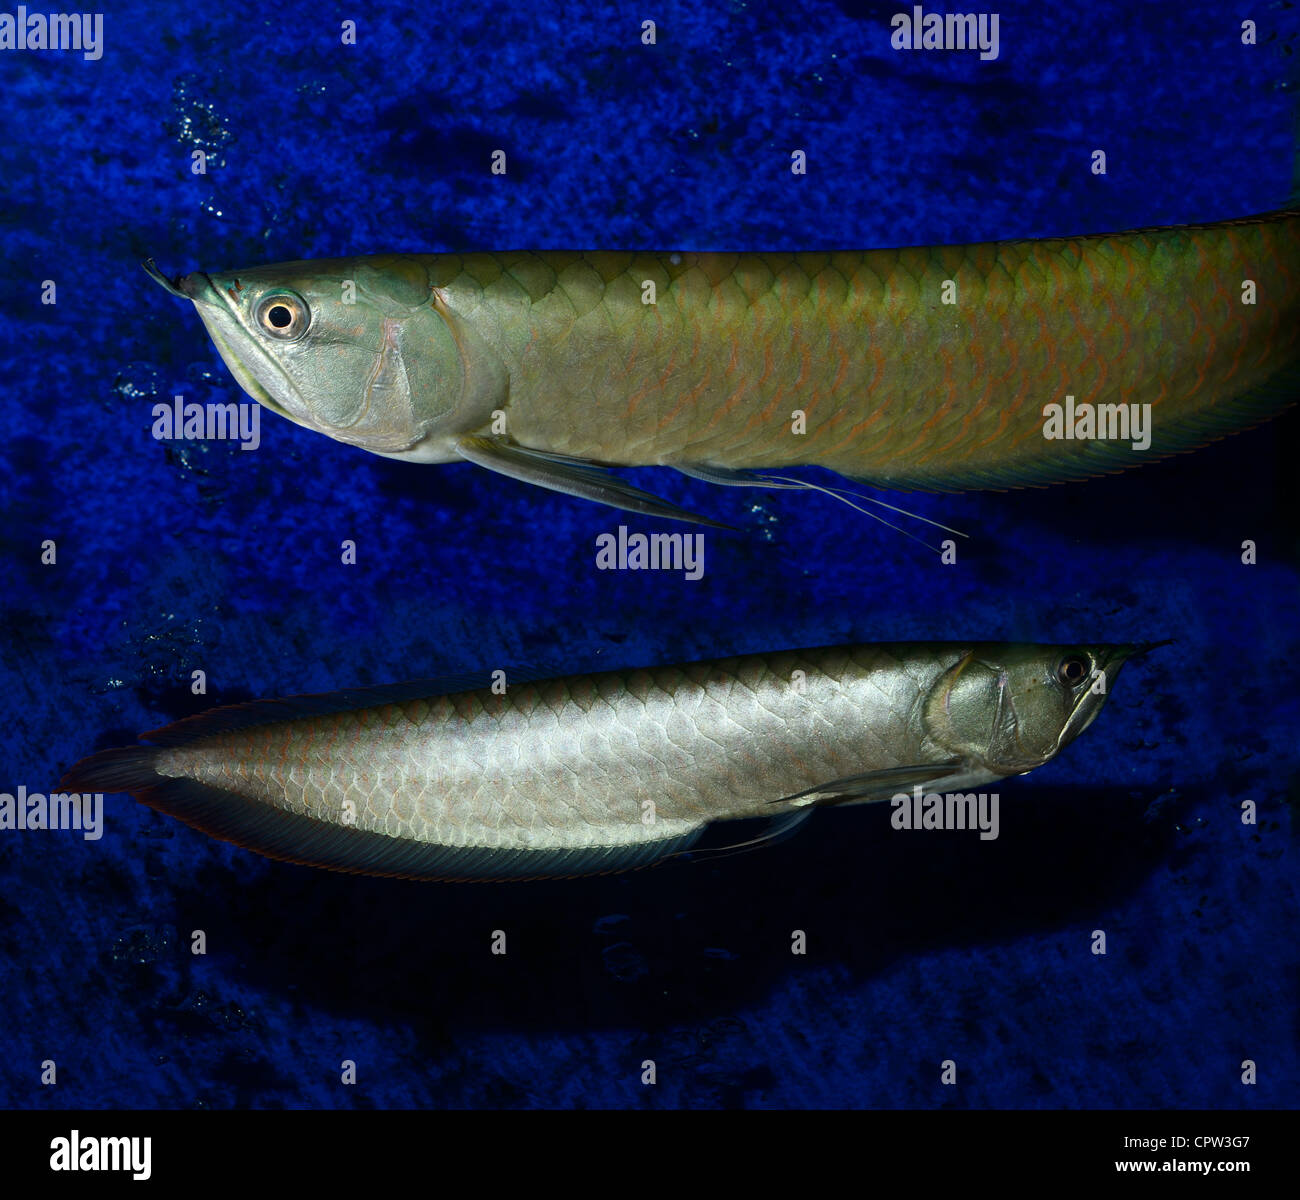 Two Silver Arowana Bonytongue freshwater fish from the Amazon river in an aquarium Peoples Republic of China Stock Photo